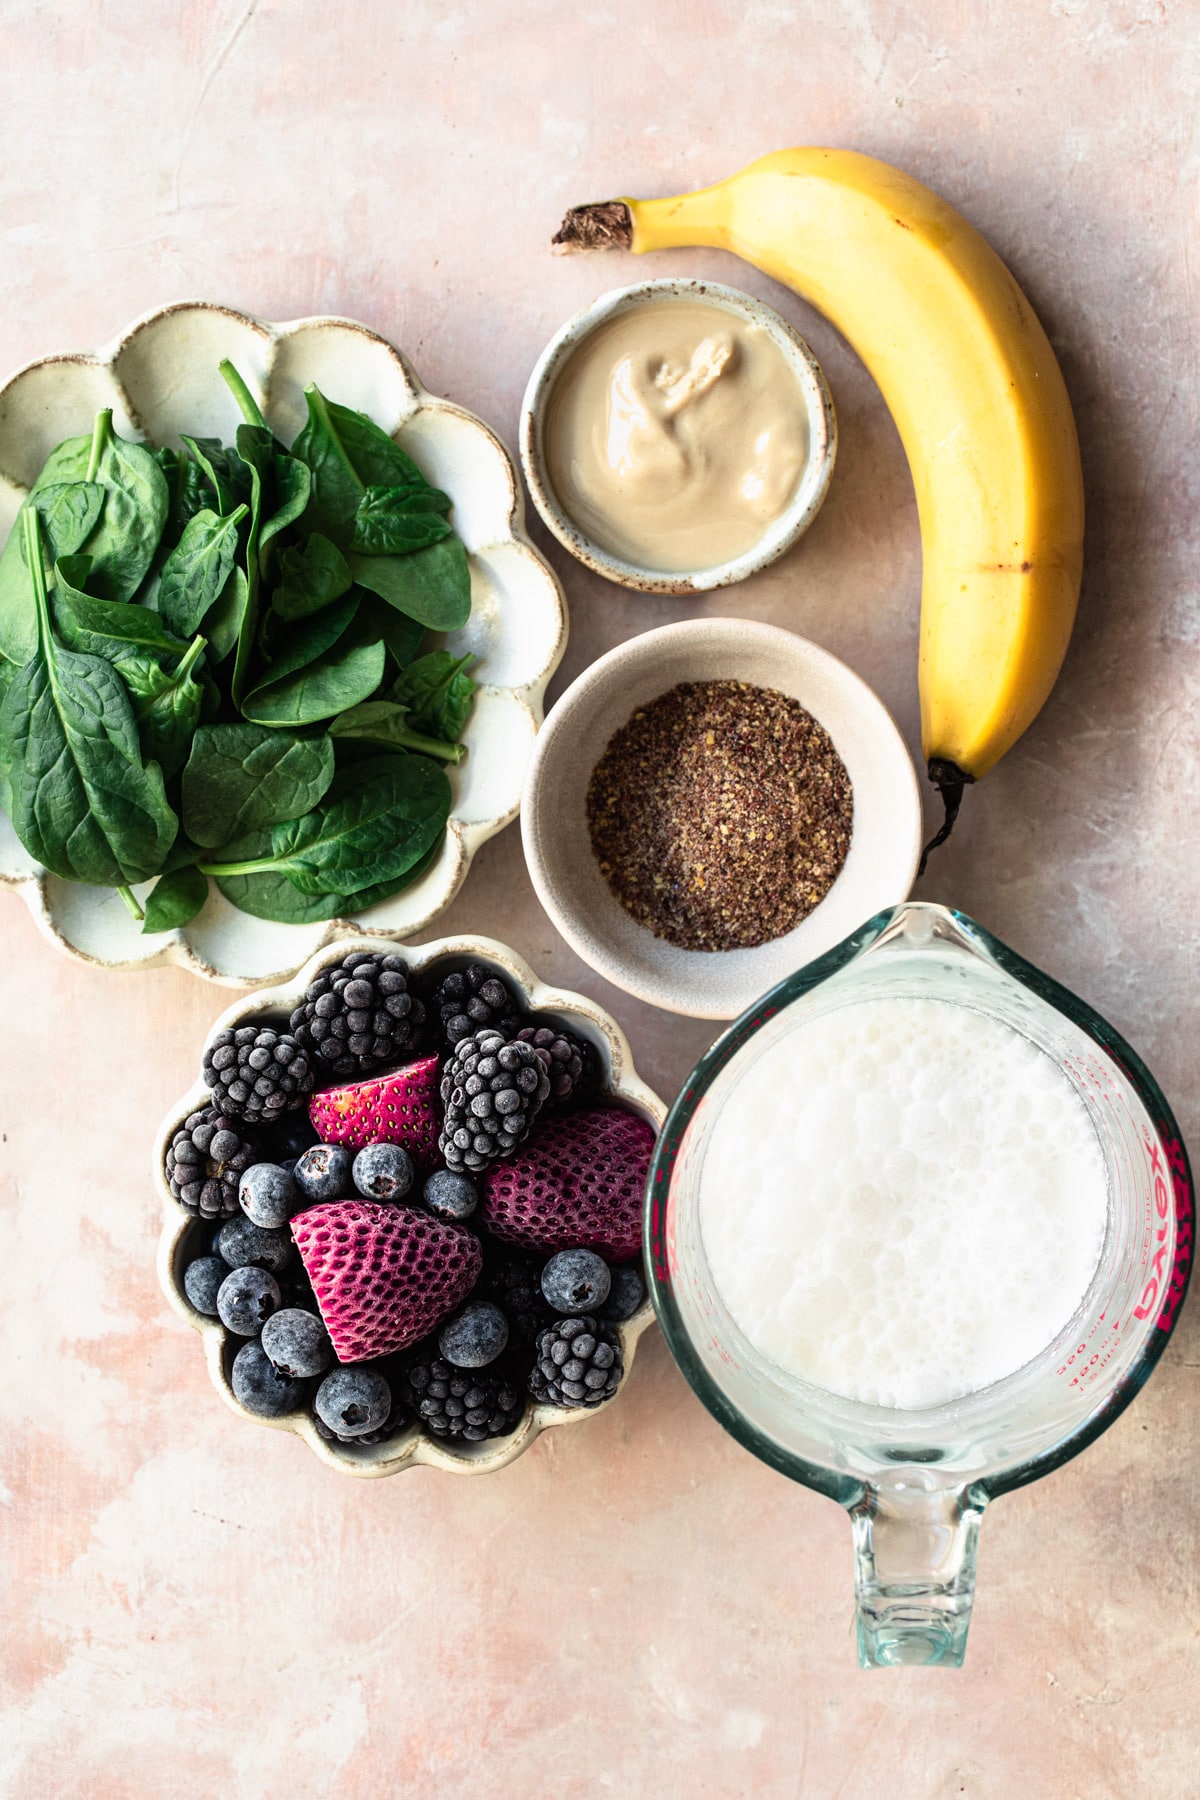 ingredients for berry smoothie including spinach, berries, coconut milk, flaxseed meal and tahini.